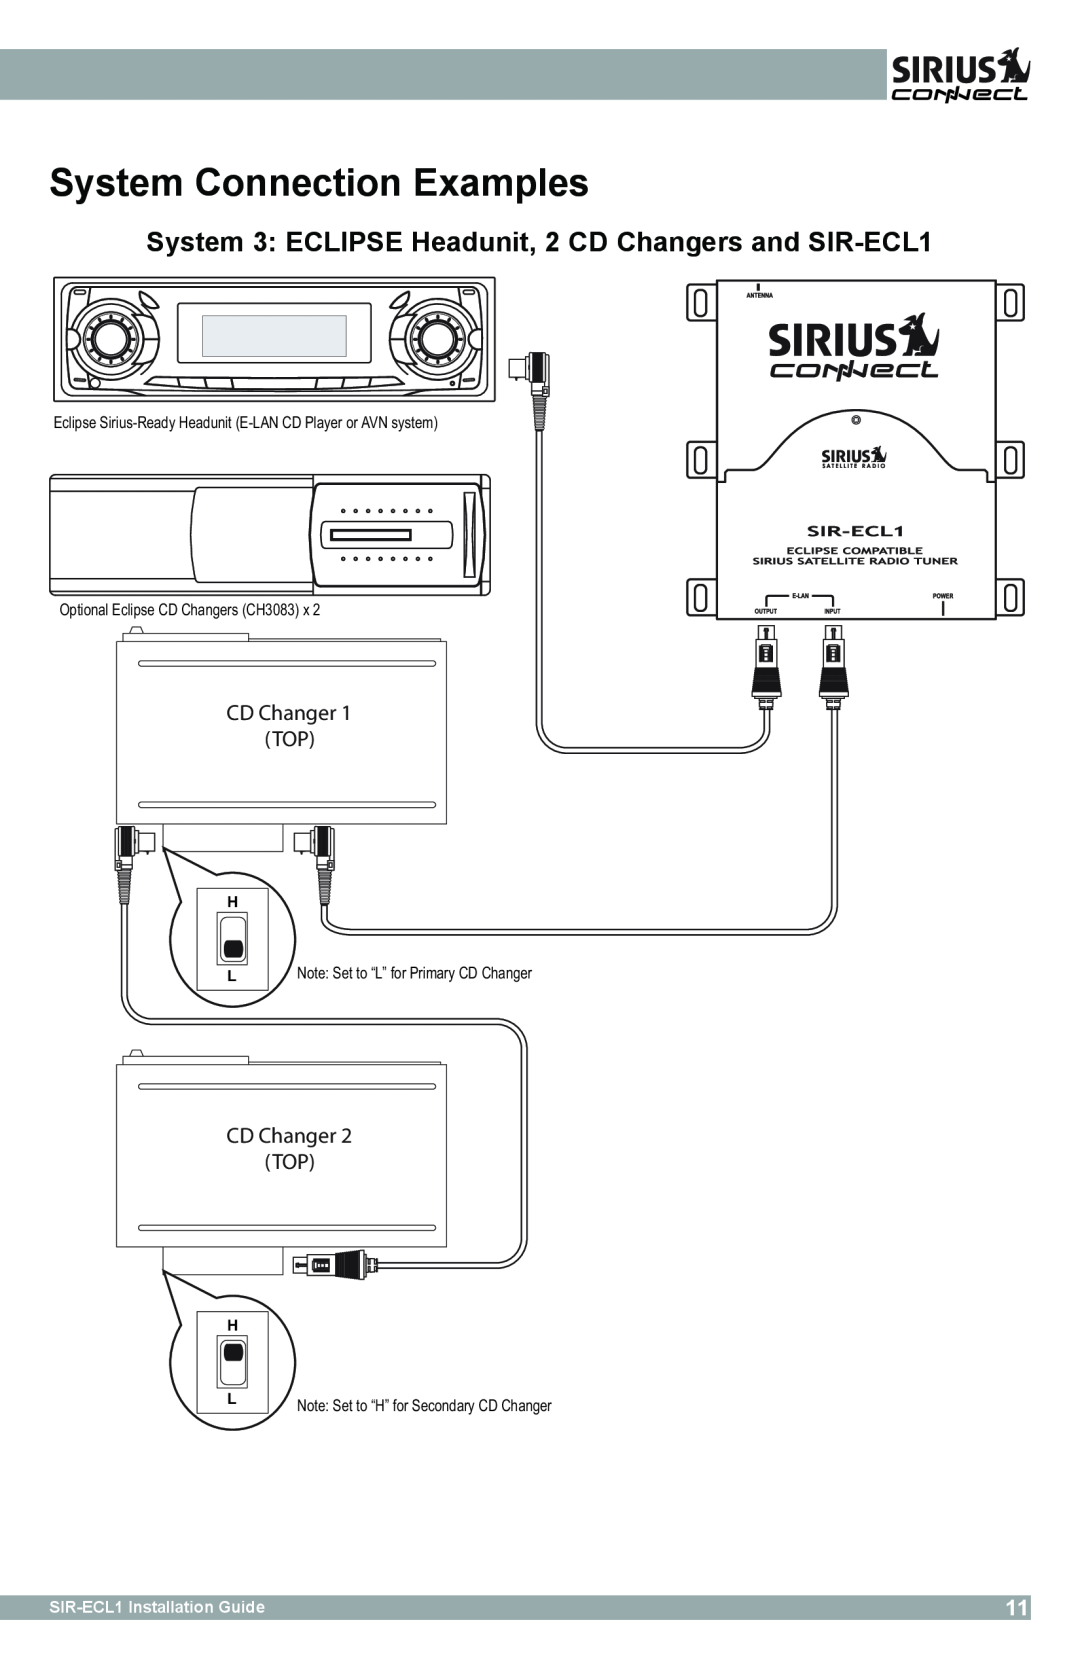 Sirius Satellite Radio SIR-ECL1 manual System Connection Examples, CD Changer TOP, Optional Eclipse CD Changers CH3083 